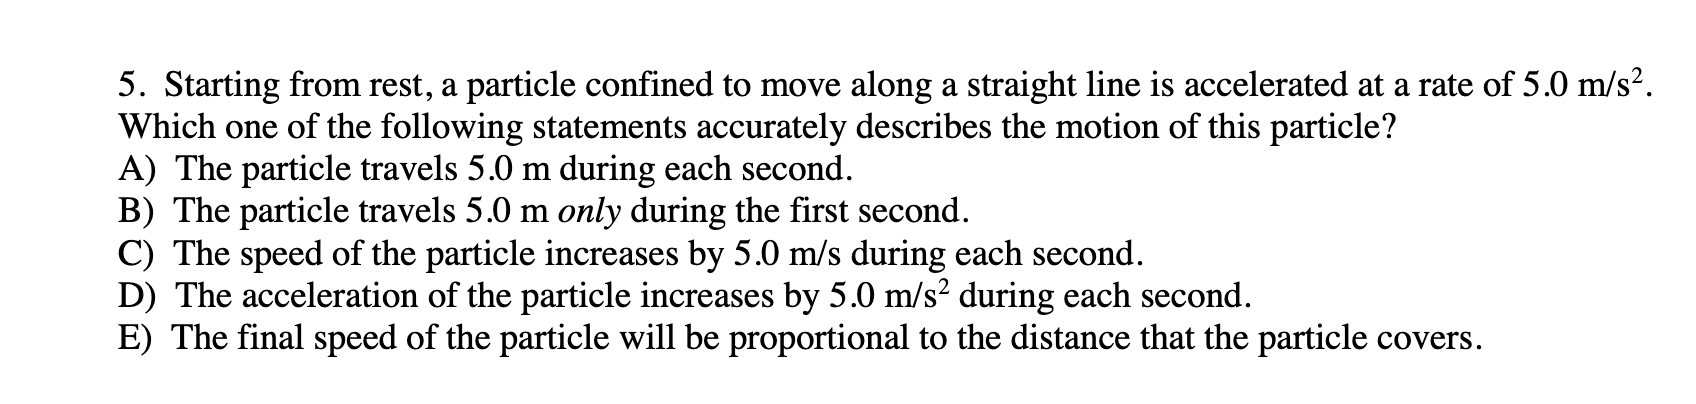 5. Starting from rest, a particle confined to move along a straight line is accelerated at a rate of 5.0 m/s².
Which one of the following statements accurately describes the motion of this particle?
A) The particle travels 5.0 m during each second.
B) The particle travels 5.0 m only during the first second.
C) The speed of the particle increases by 5.0 m/s during each second.
D) The acceleration of the particle increases by 5.0 m/s² during each second.
E) The final speed of the particle will be proportional to the distance that the particle covers.
